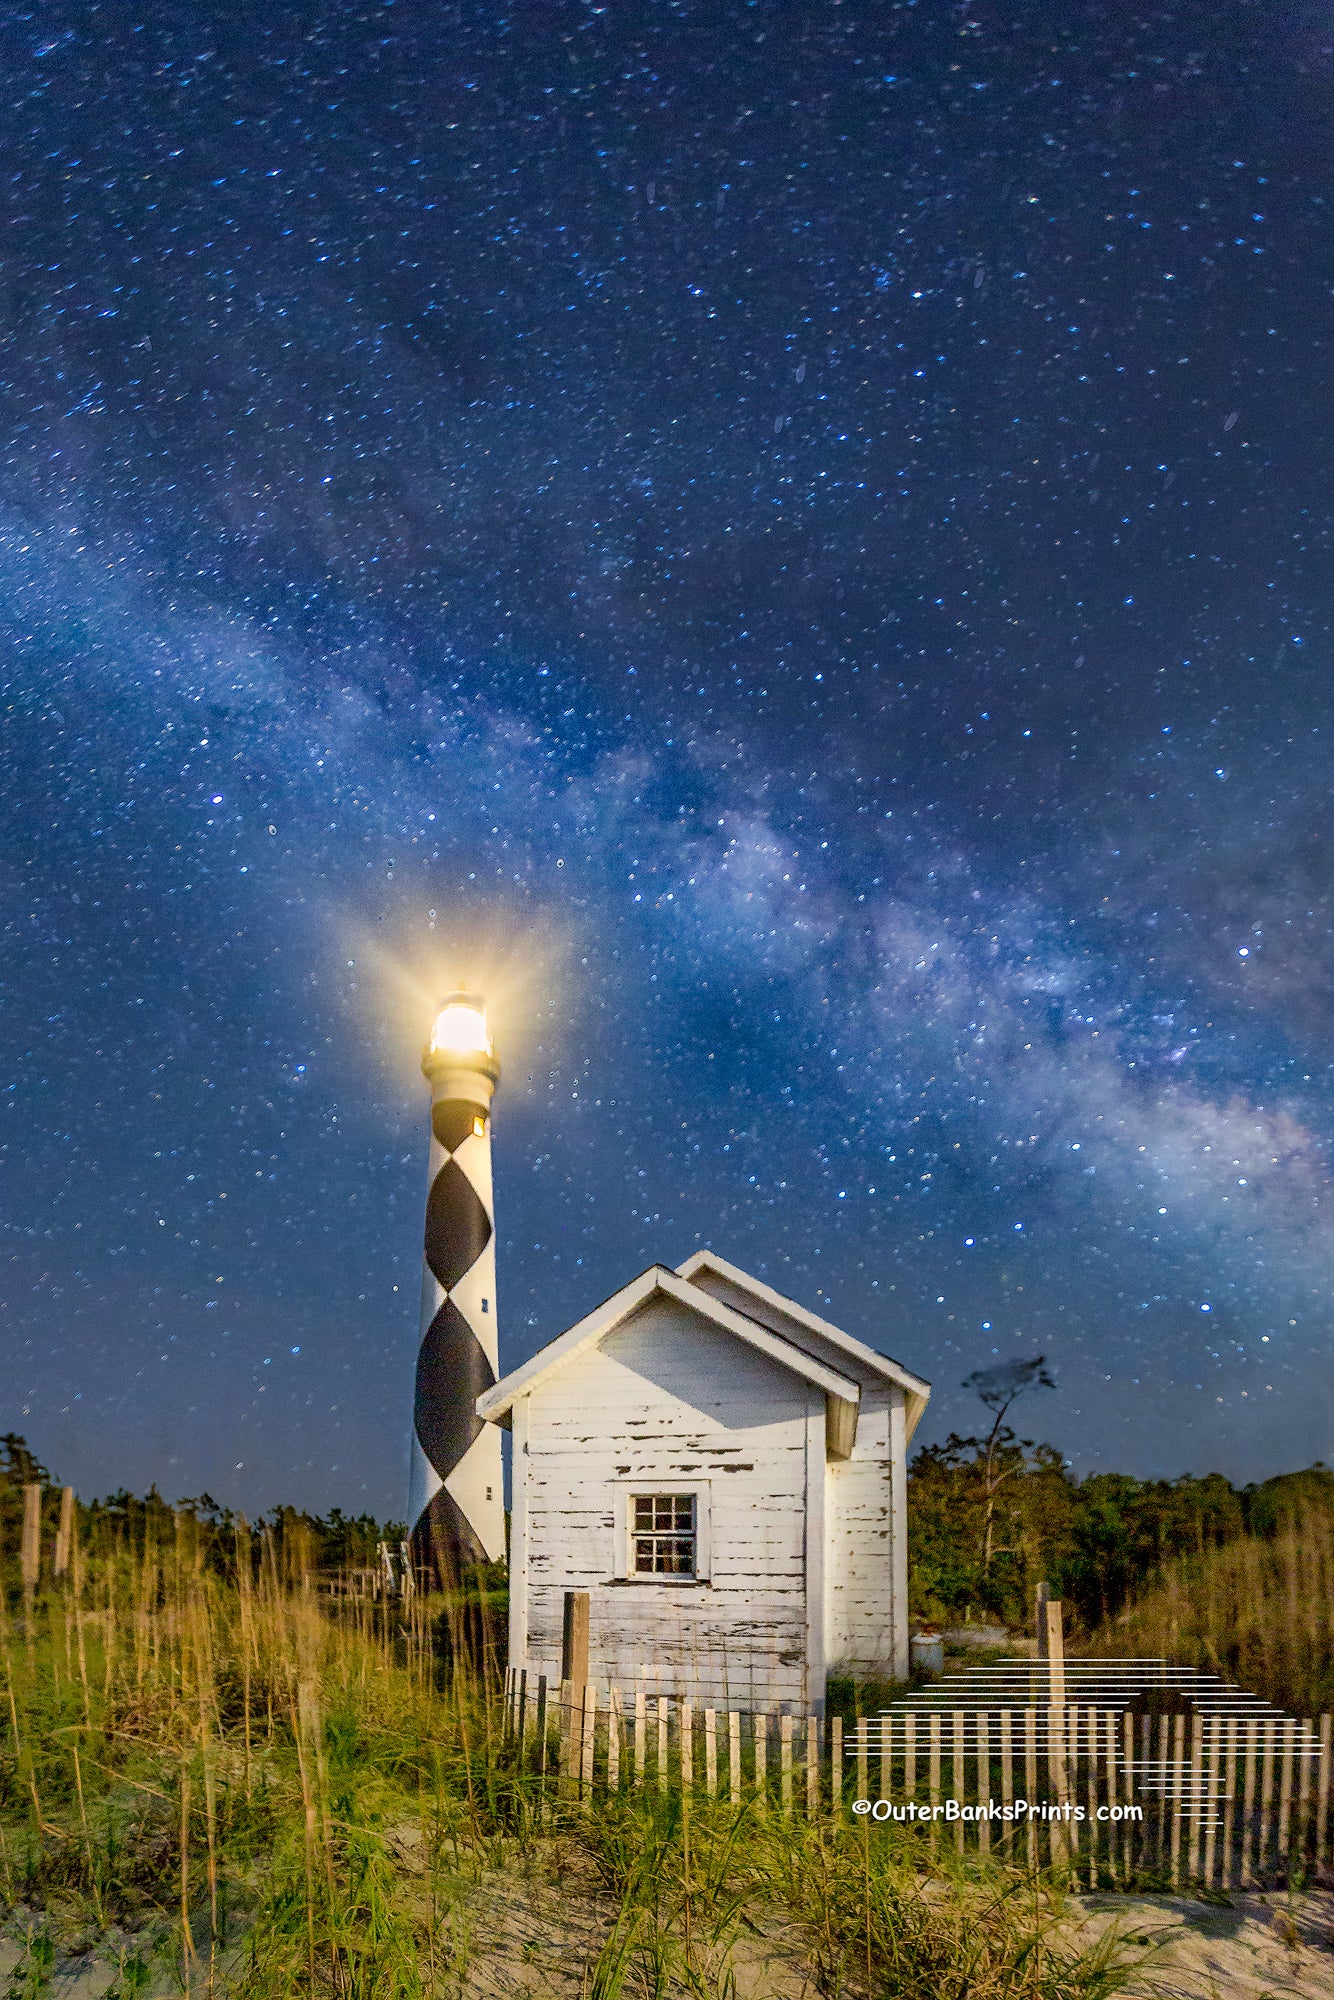 Cape Lookout Lighthouse and Milky Way on the Corer Banks of North Carolina.